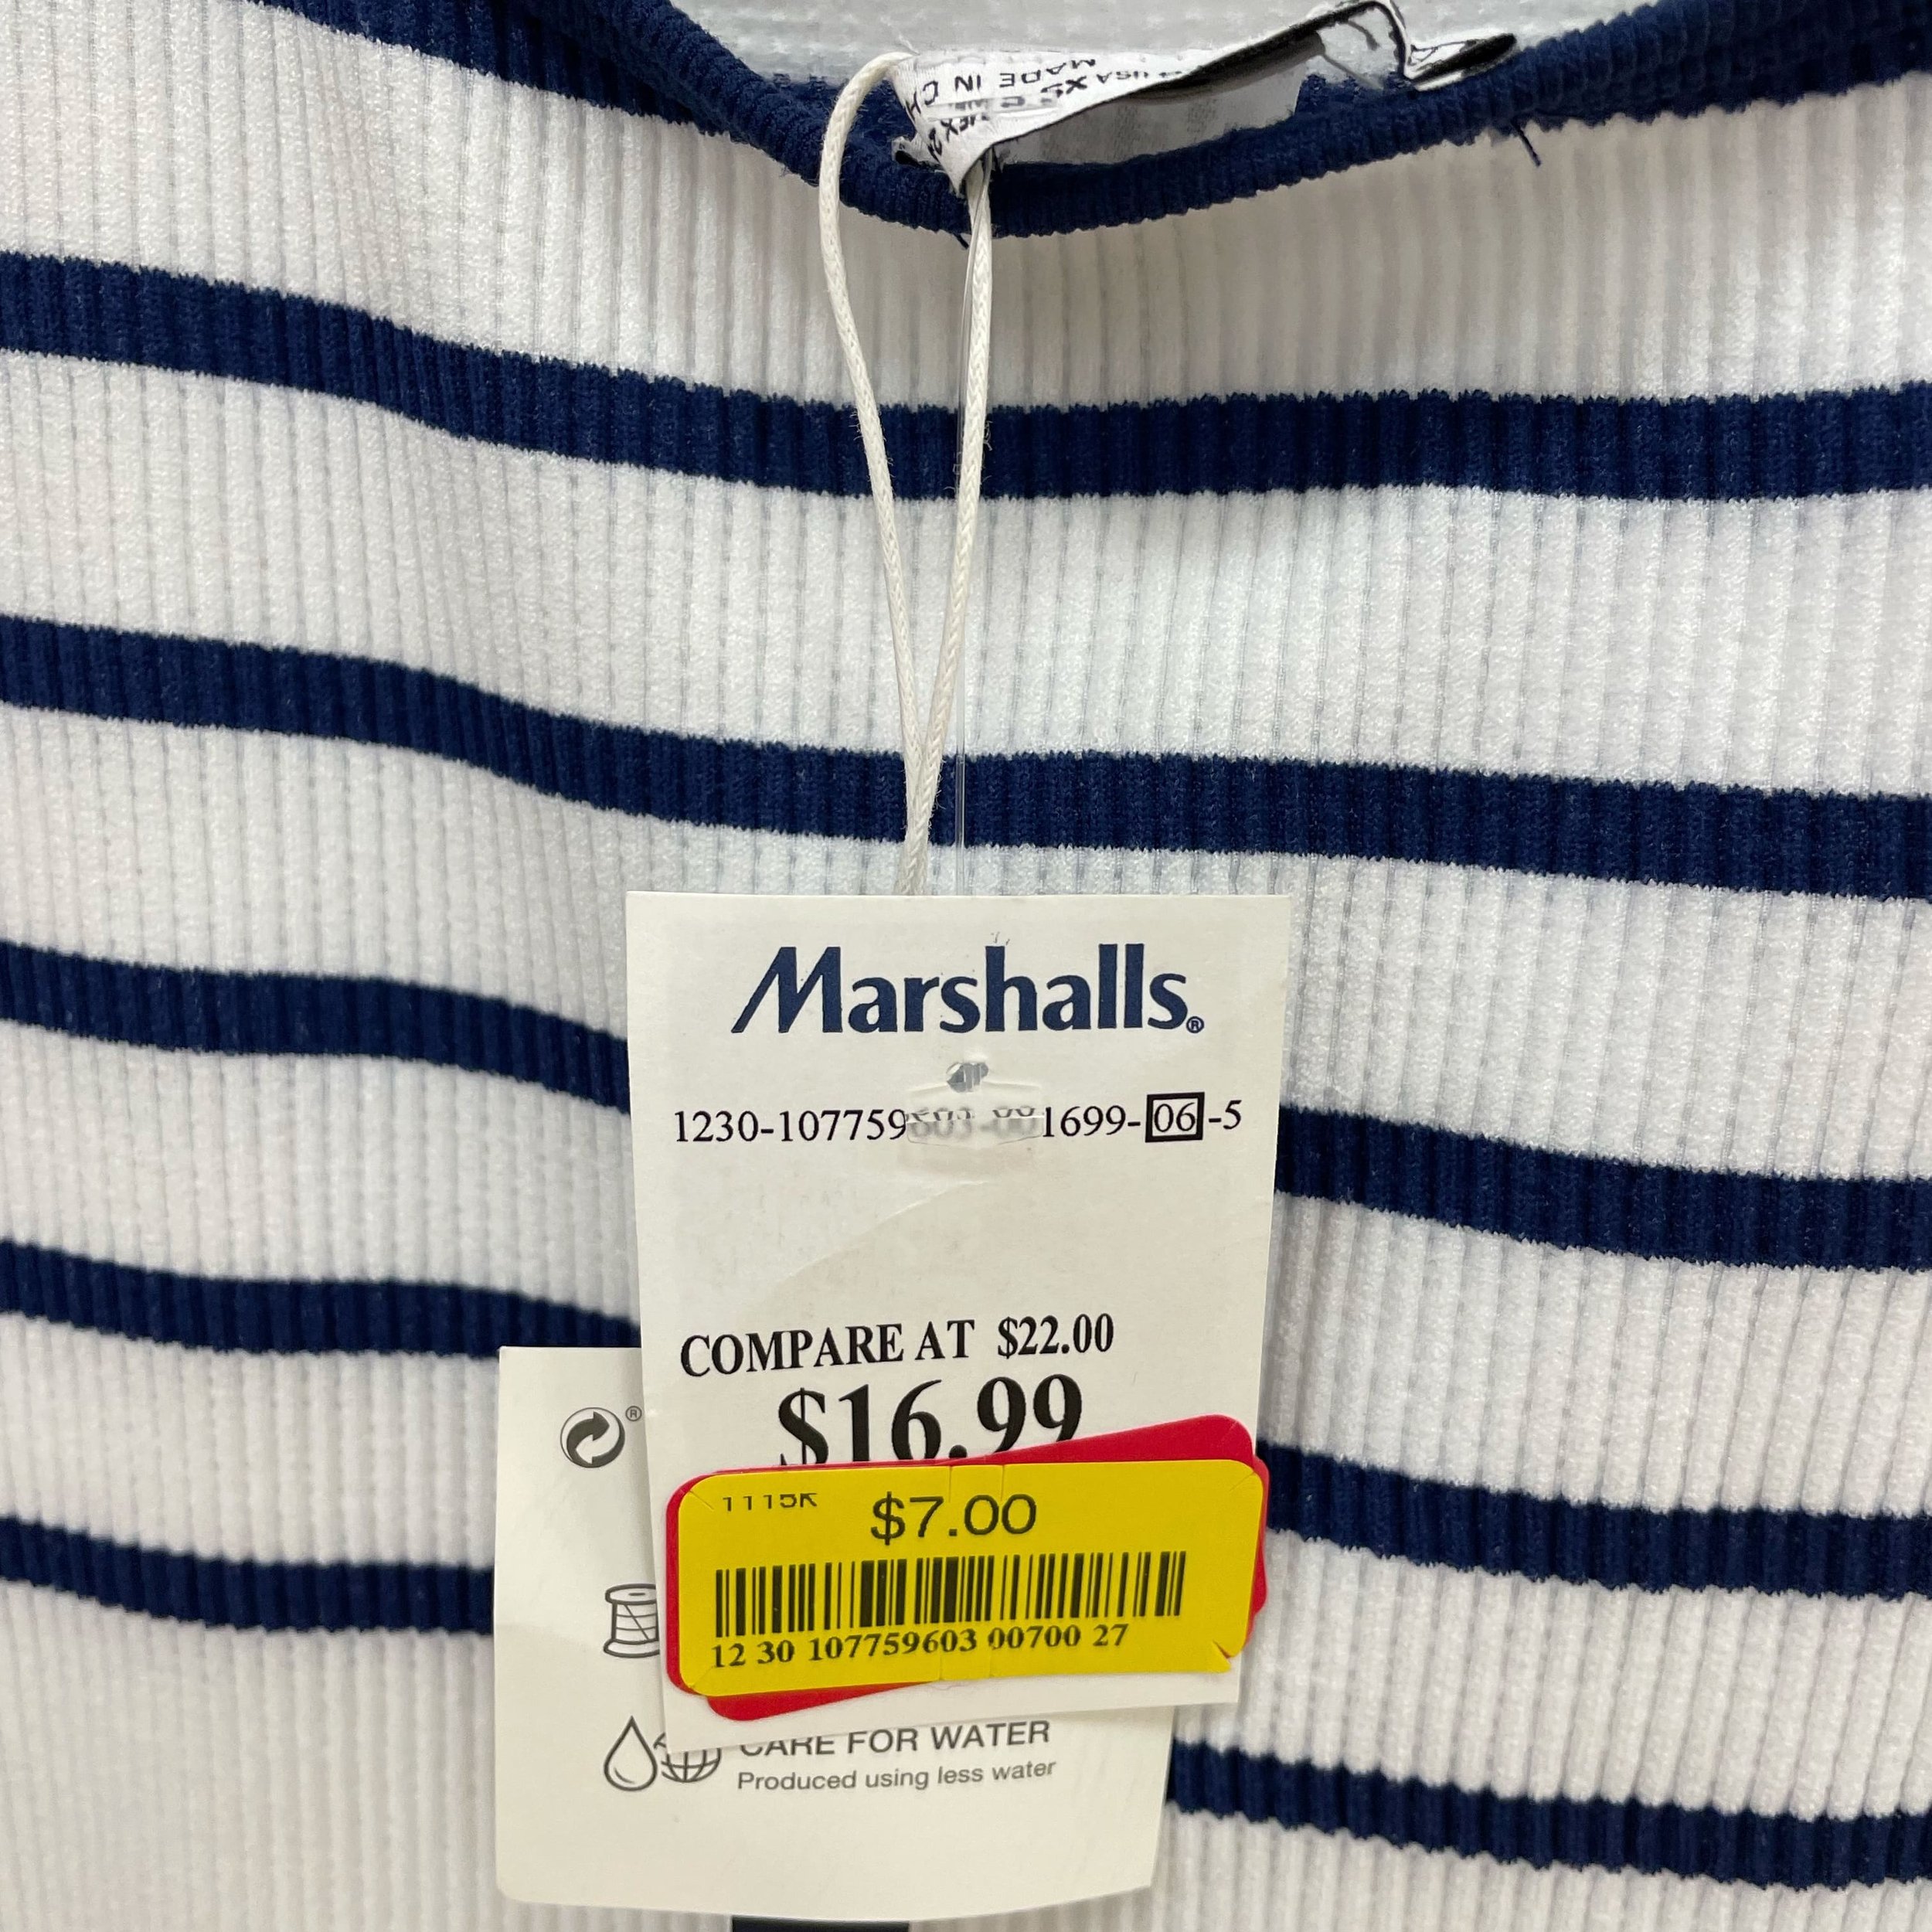 TJ MAXX SELLS DESIGNER?  HOW DO THEY GET THESES ITEMS? 